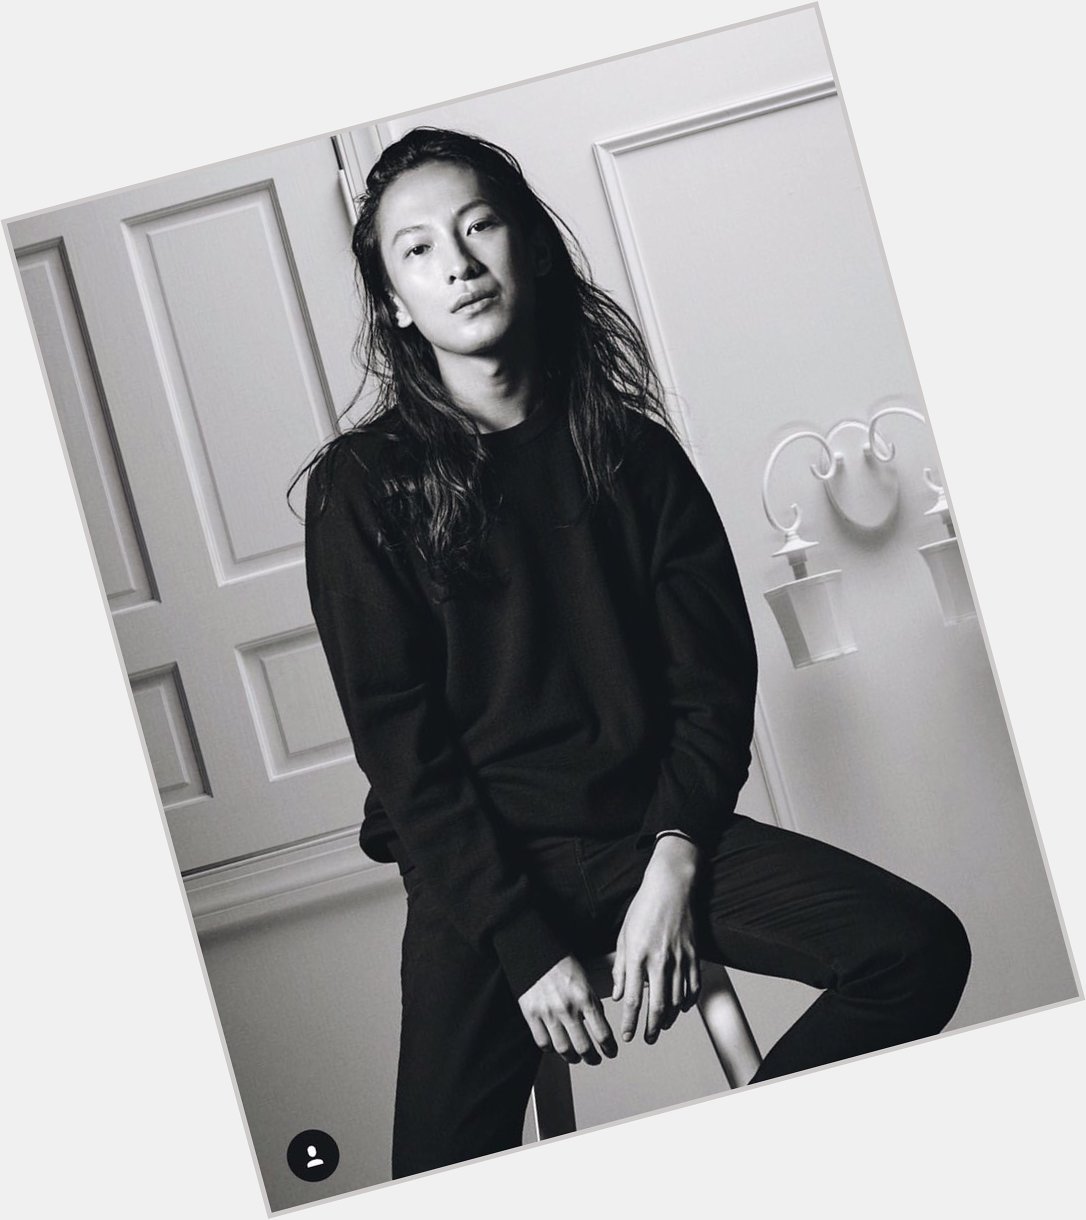 Happy birthday to one of the best designers-Alexander Wang! We hope you enjoy this wonderful day! 